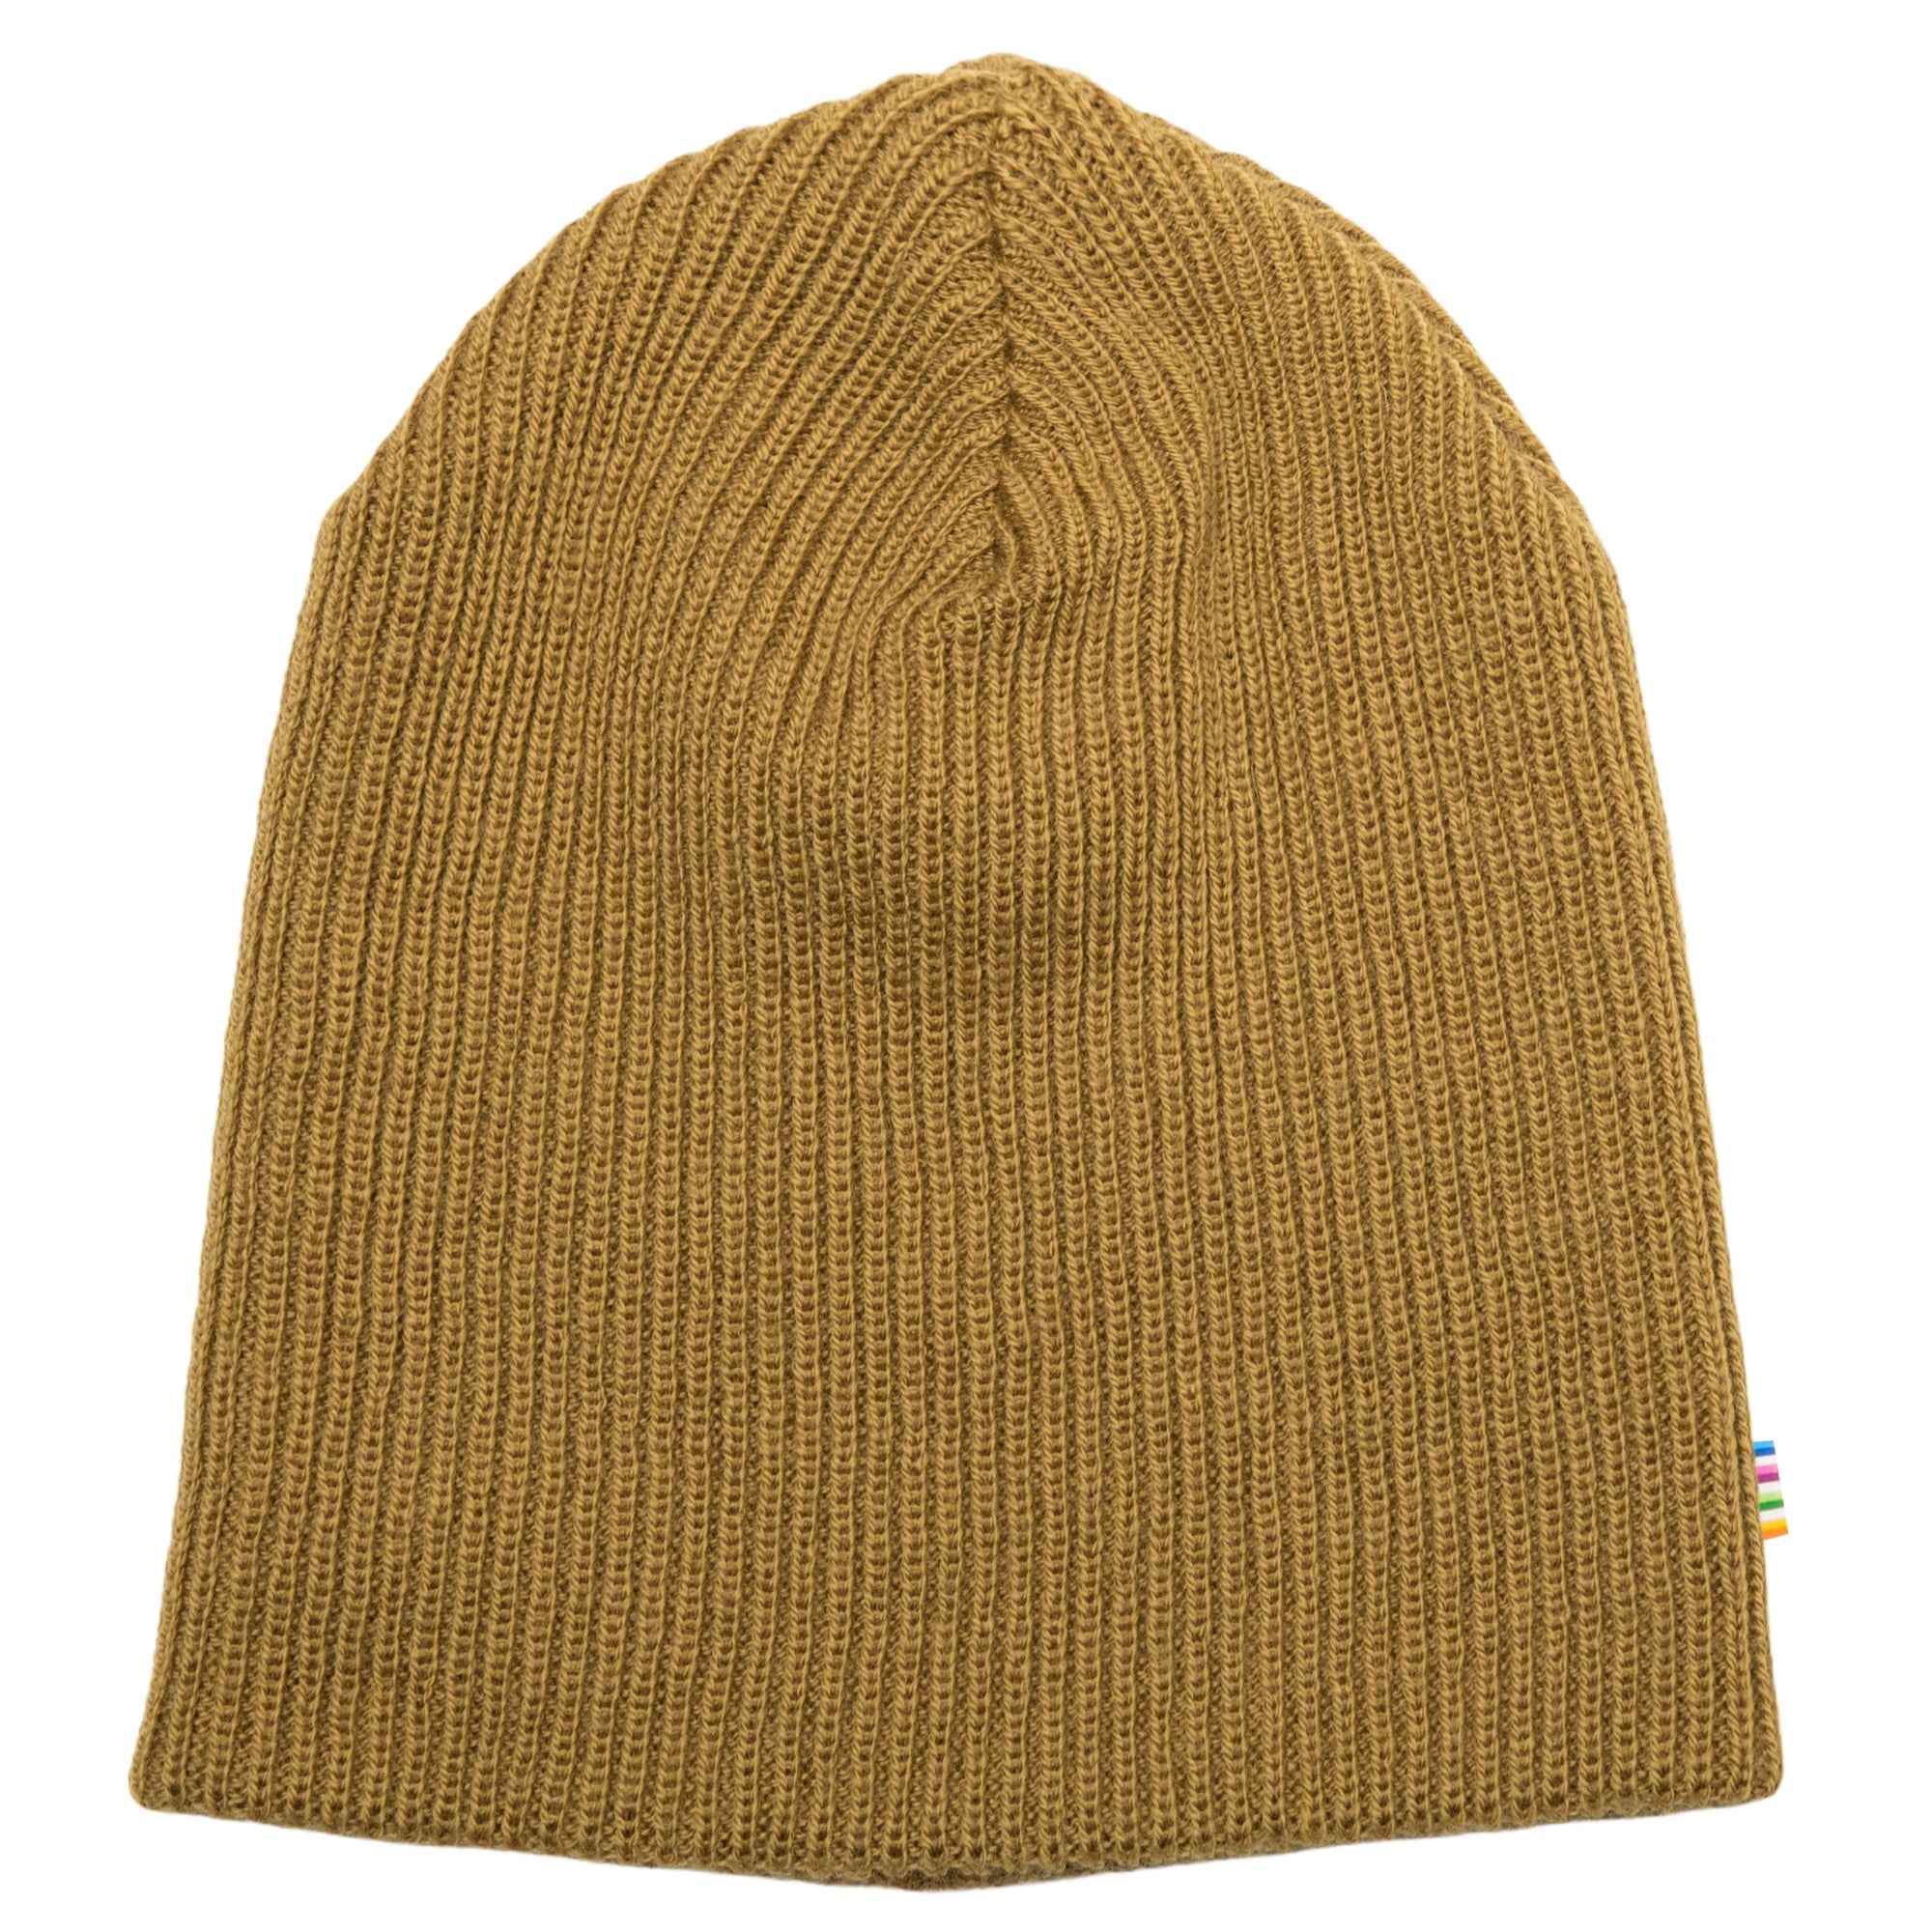 Joha - Wool Knit Double Layer Hat Curry Yellow - Muts Kerrie Geel